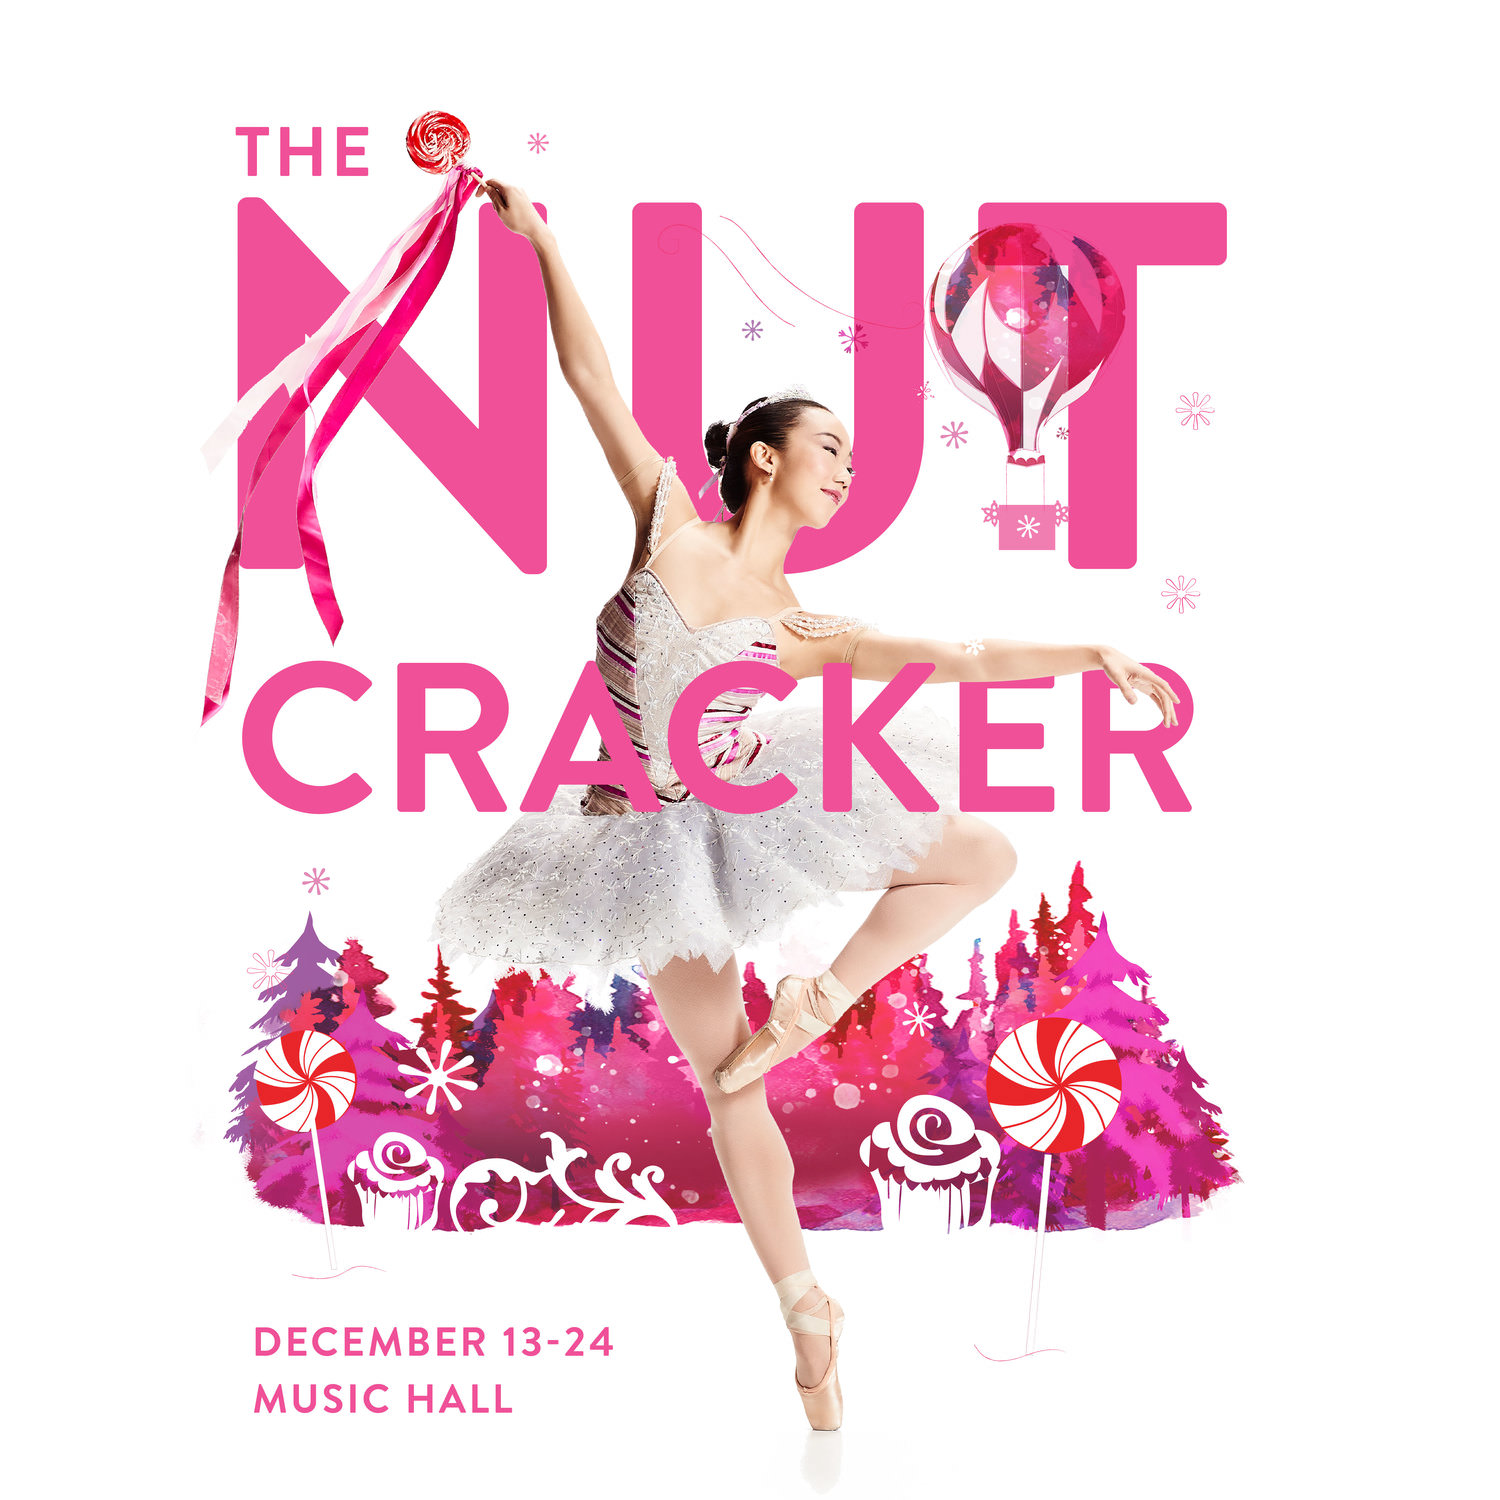 Cincinnati’s favorite holiday tradition is back!
Cincinnati Ballet’s holiday triumph returns once again to Music Hall in all its splendor. Complete with eye-popping sets and costumes, and set to Tchaikovsky’s beloved score, The Nutcracker is the family tradition that can’t be missed. Embark on a journey with Clara and her Nutcracker Prince, and follow the Snow Queen and her King to the Land of Sweets, where the Sugar Plum Fairy and Cavalier are waiting to embrace you with treats and exotic celebrations. 1